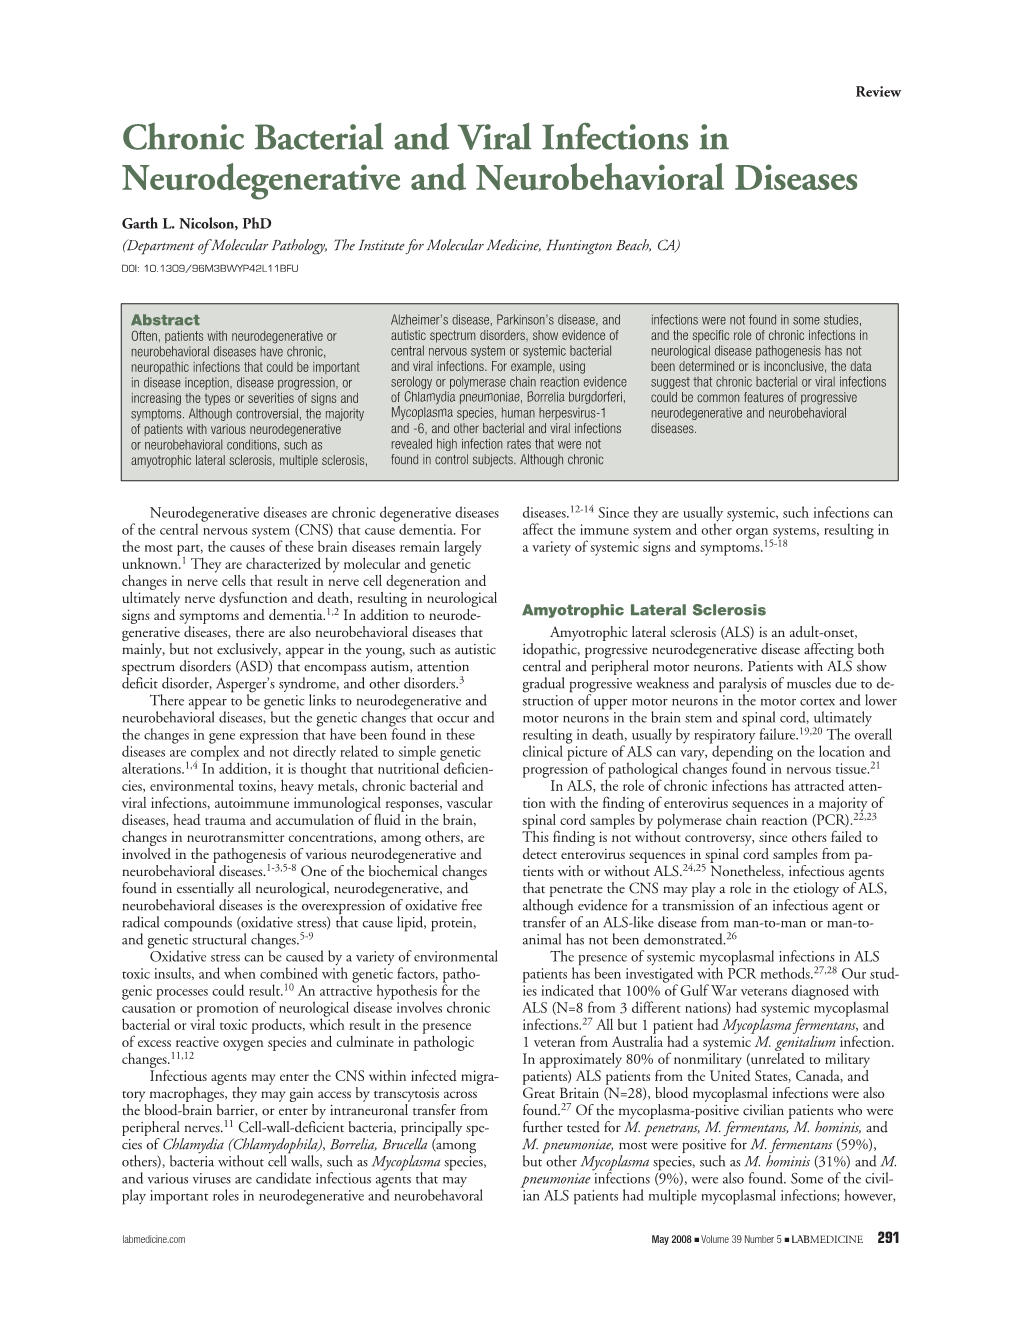 Chronic Bacterial and Viral Infections in Neurodegenerative and Neurobehavioral Diseases